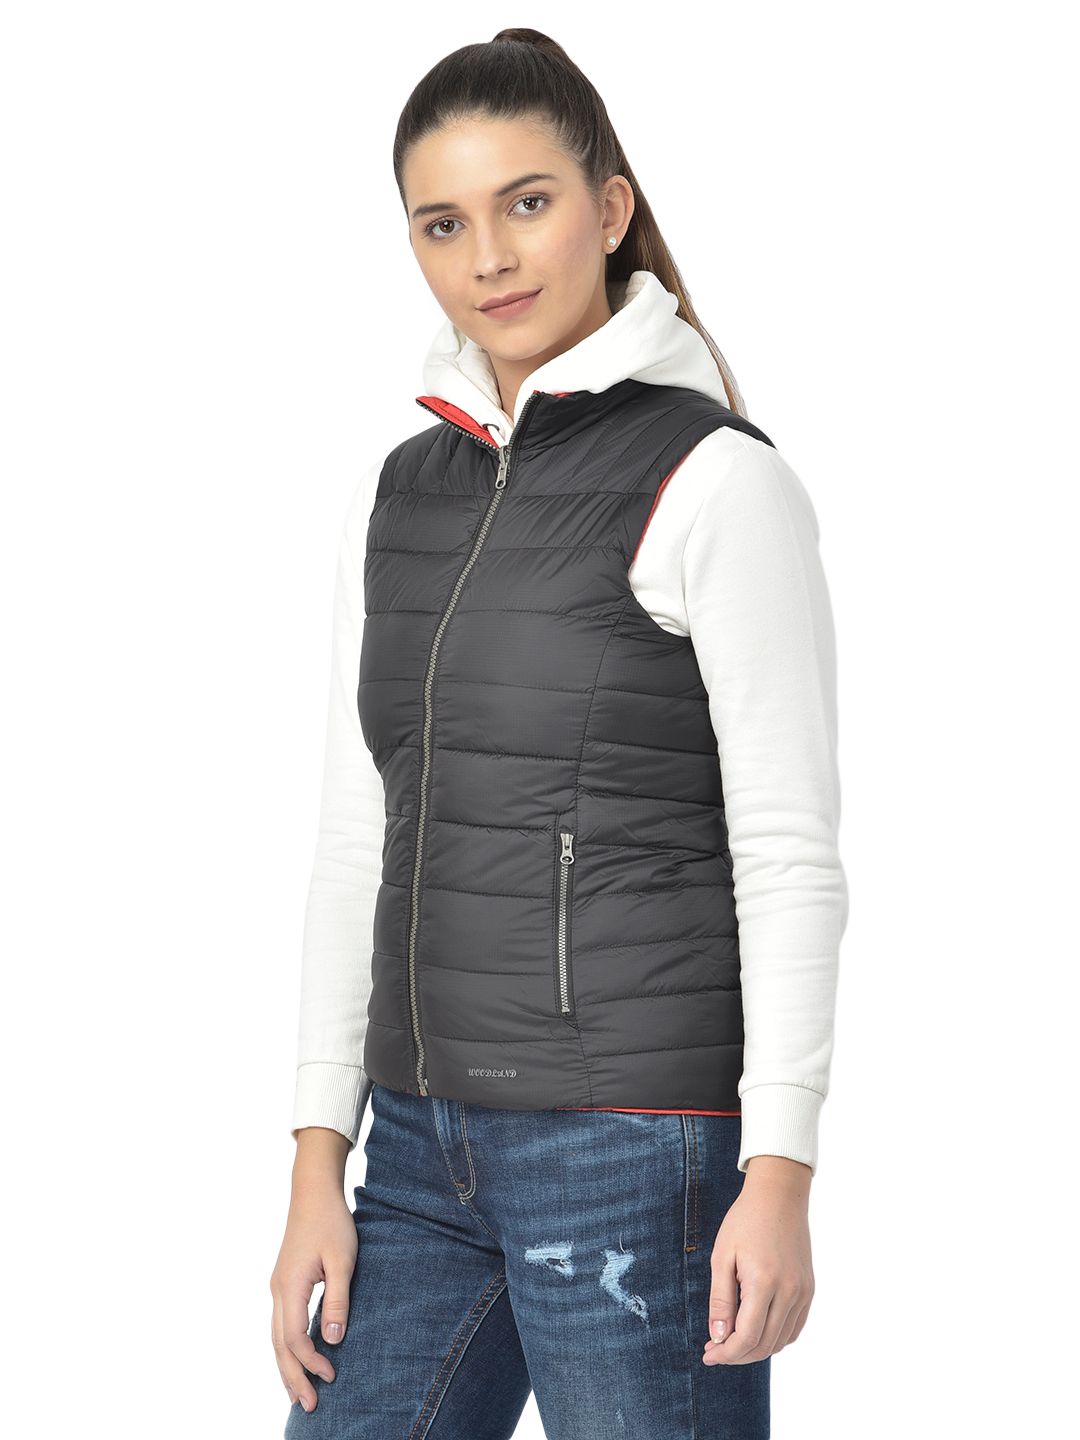 C&B Quilted Stealth Vest - Golf Course Superintendents Association of  America